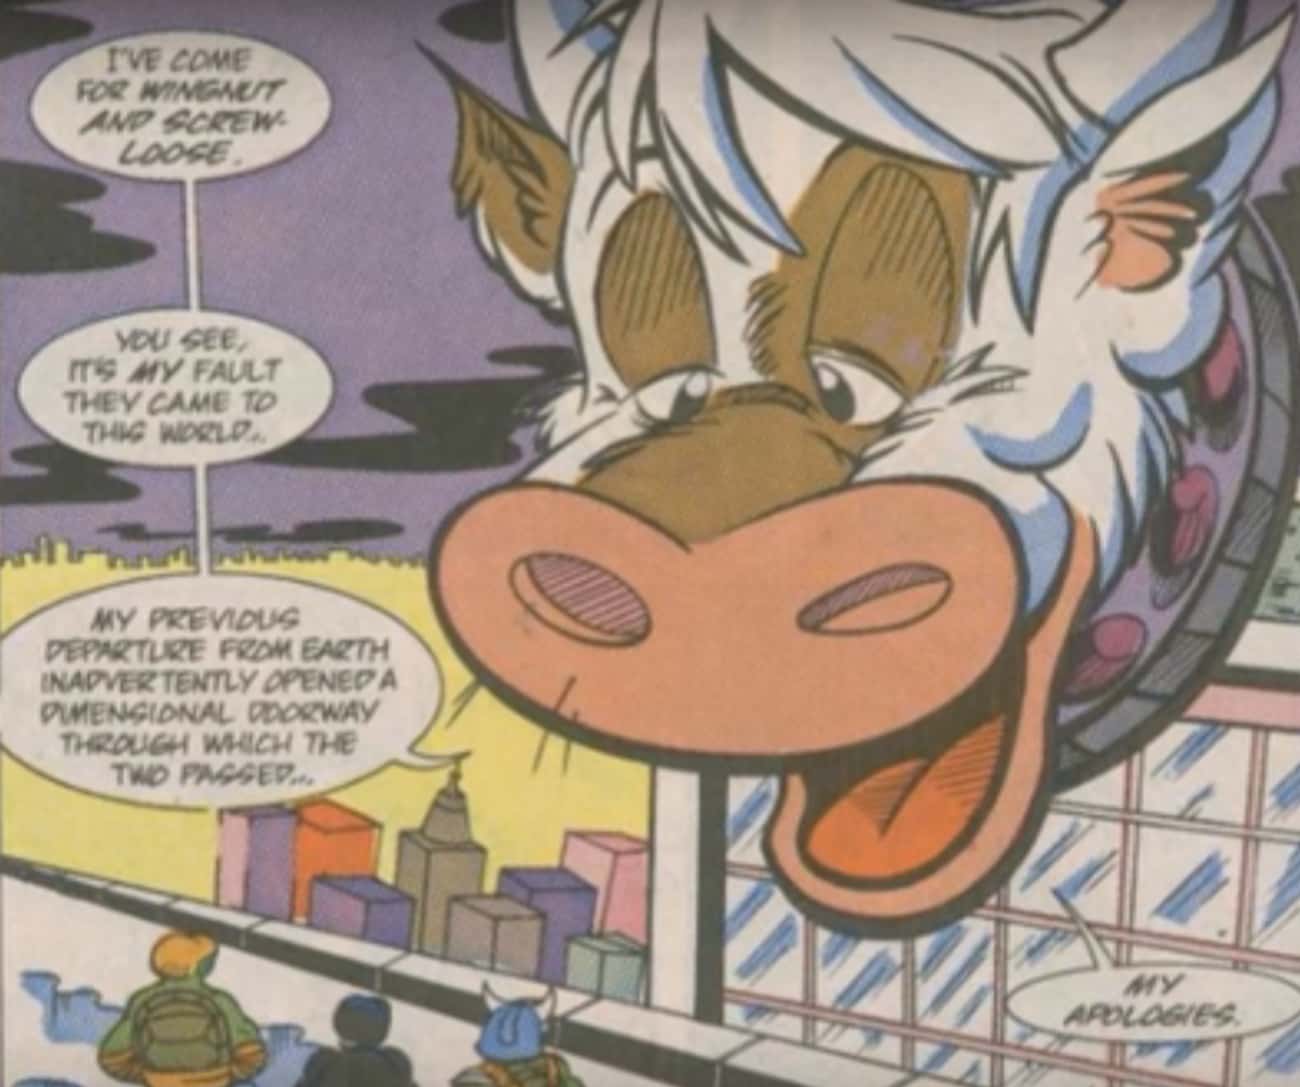 The Turtles Used A Cow Head For Interdimensional Travel